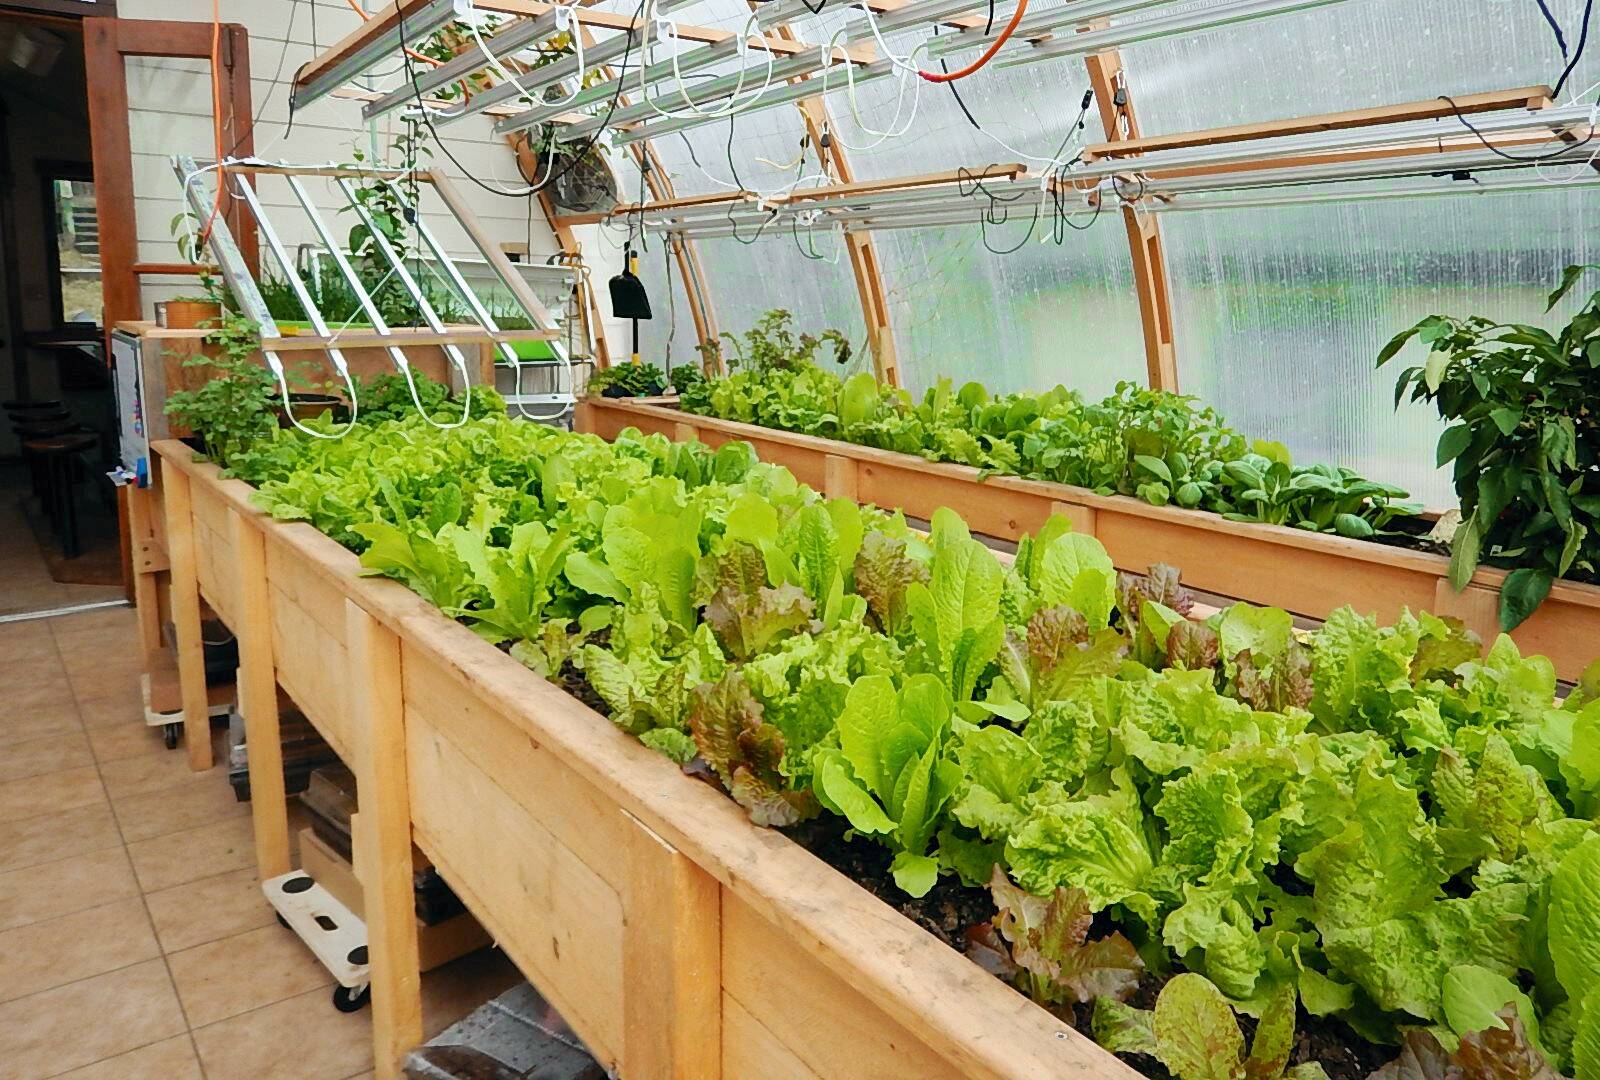 Courtesy photo / Kevin and Carlene Allred 
Greens grow in the Tenakee Springs greenhouse run by Kevin and Carlene Allred. The greenhouse produces fresh produce all year long using geothermal heat.